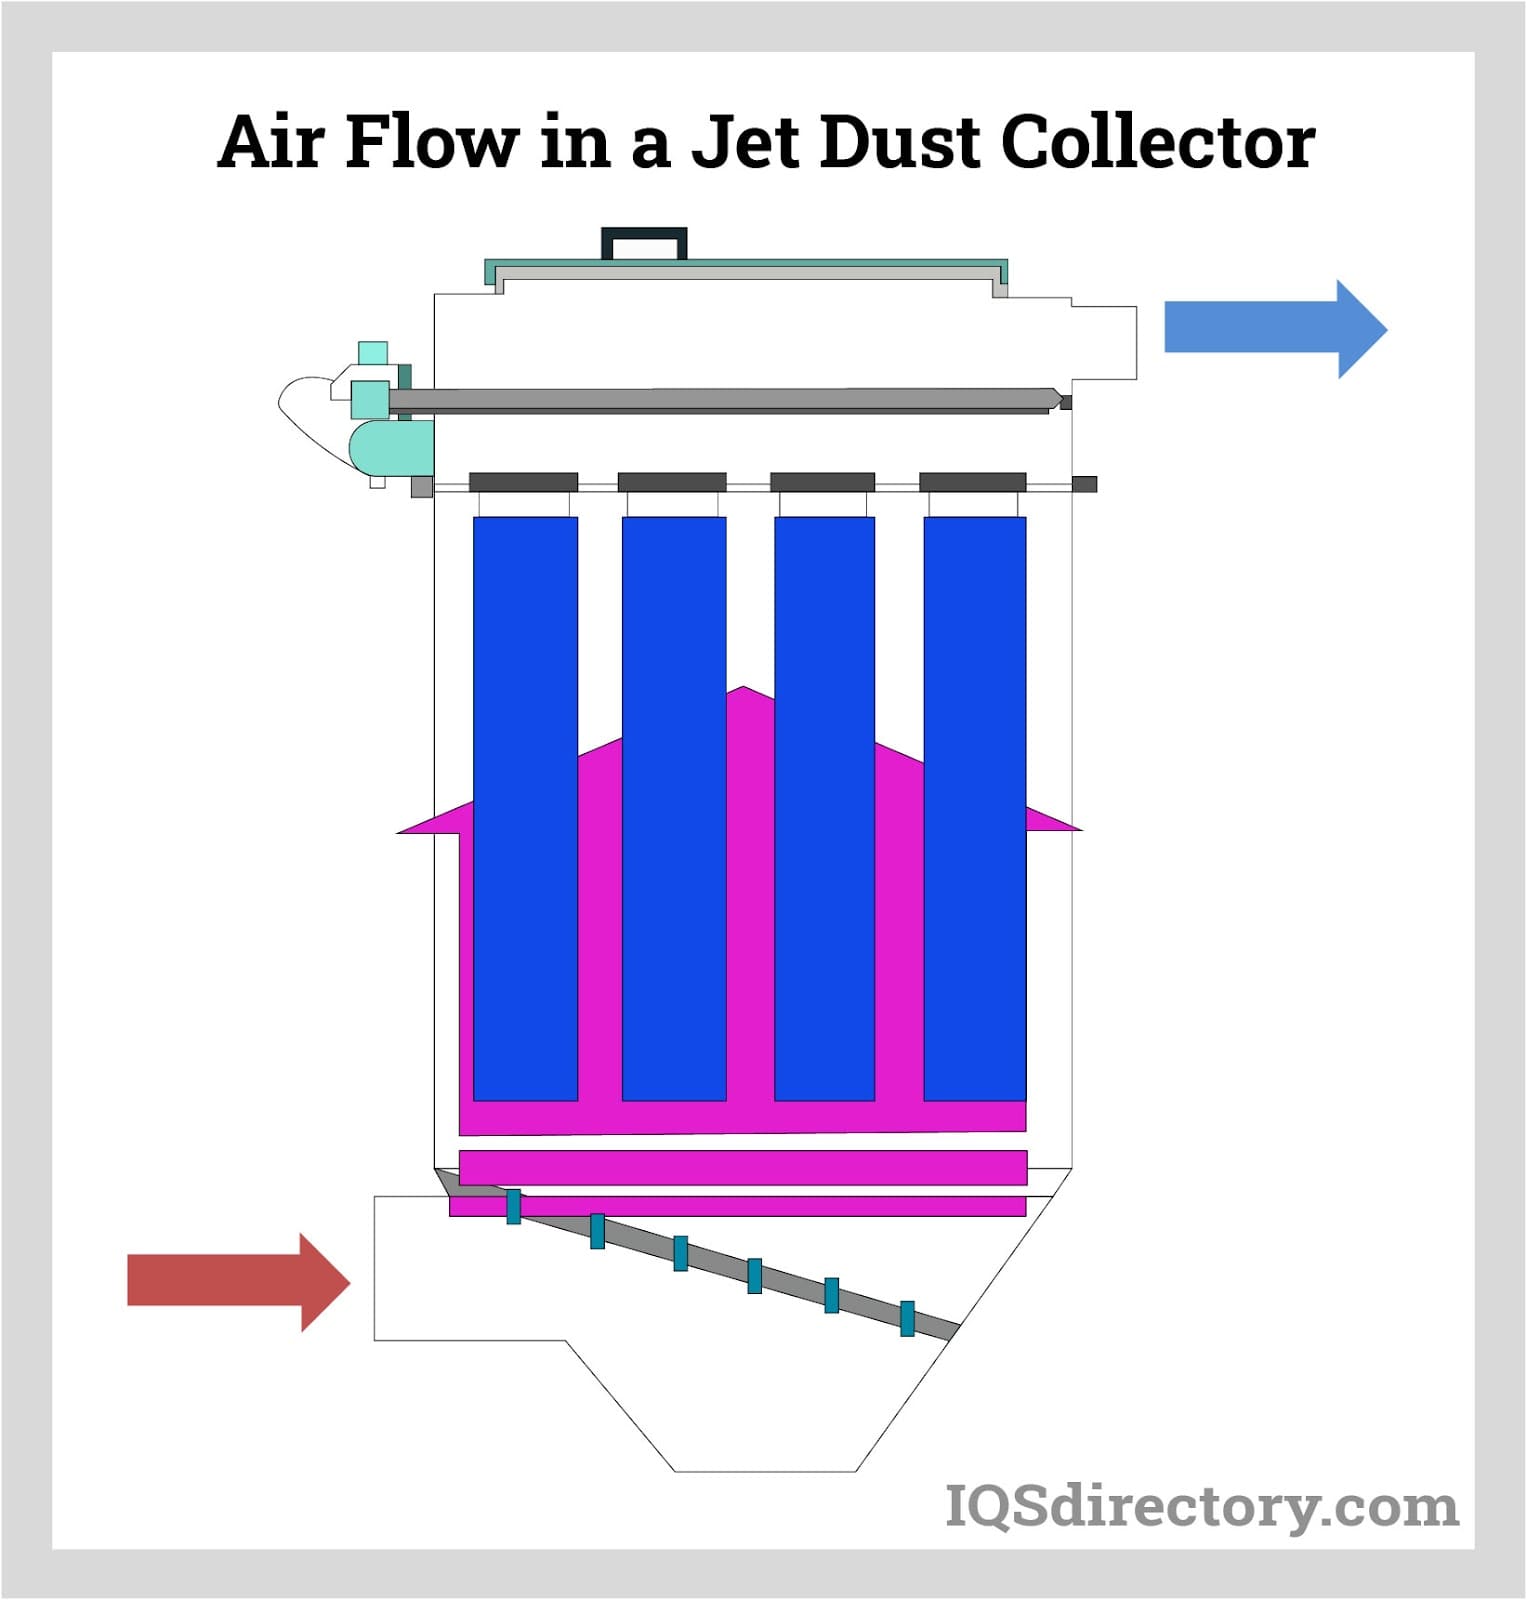 Air Flow in a Jet Dust Collector